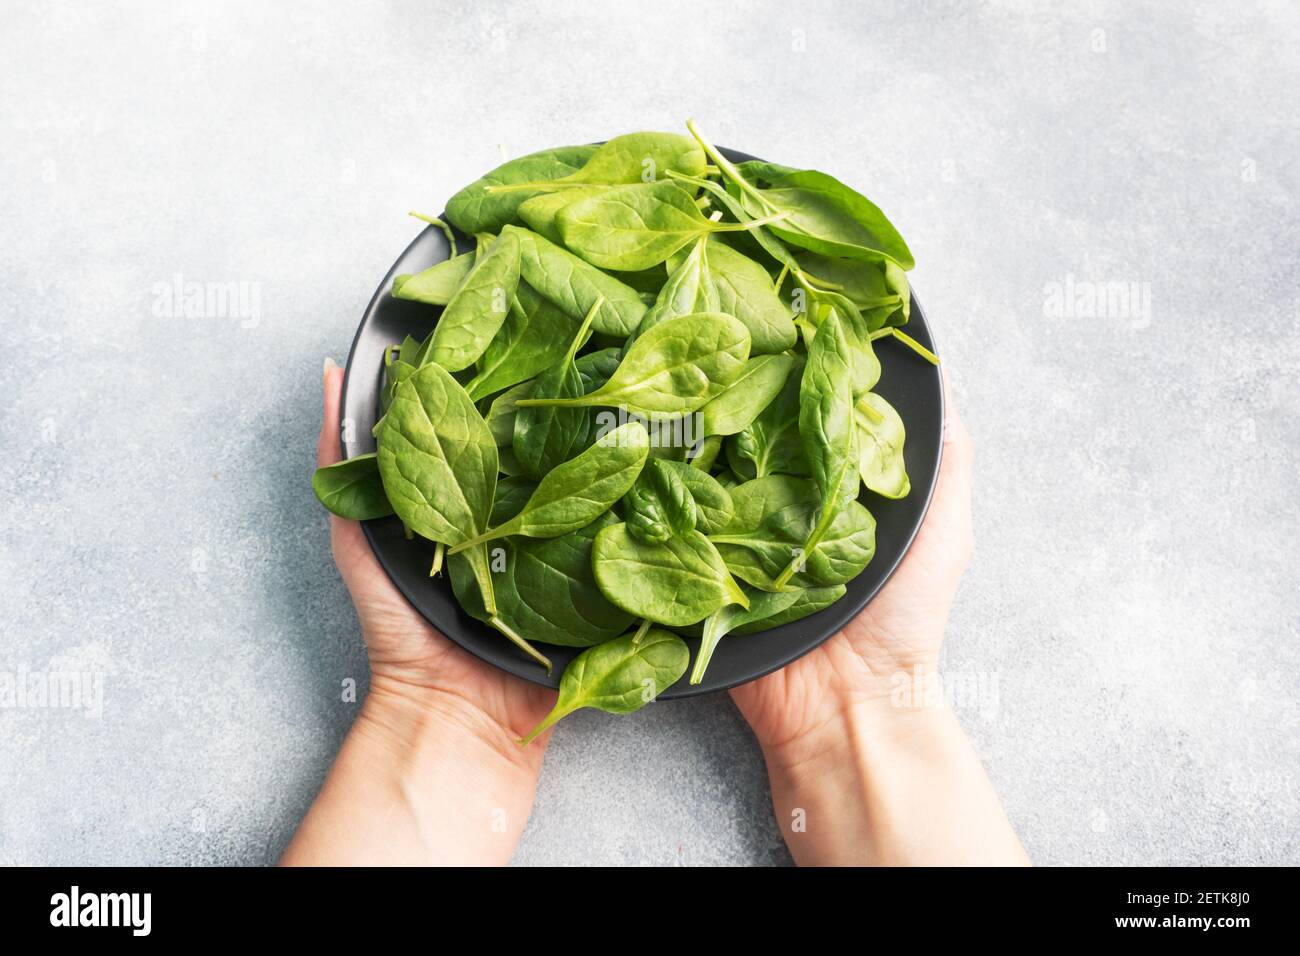 Spinach green fresh leaves on a black plate. Female hands holding a plate Stock Photo